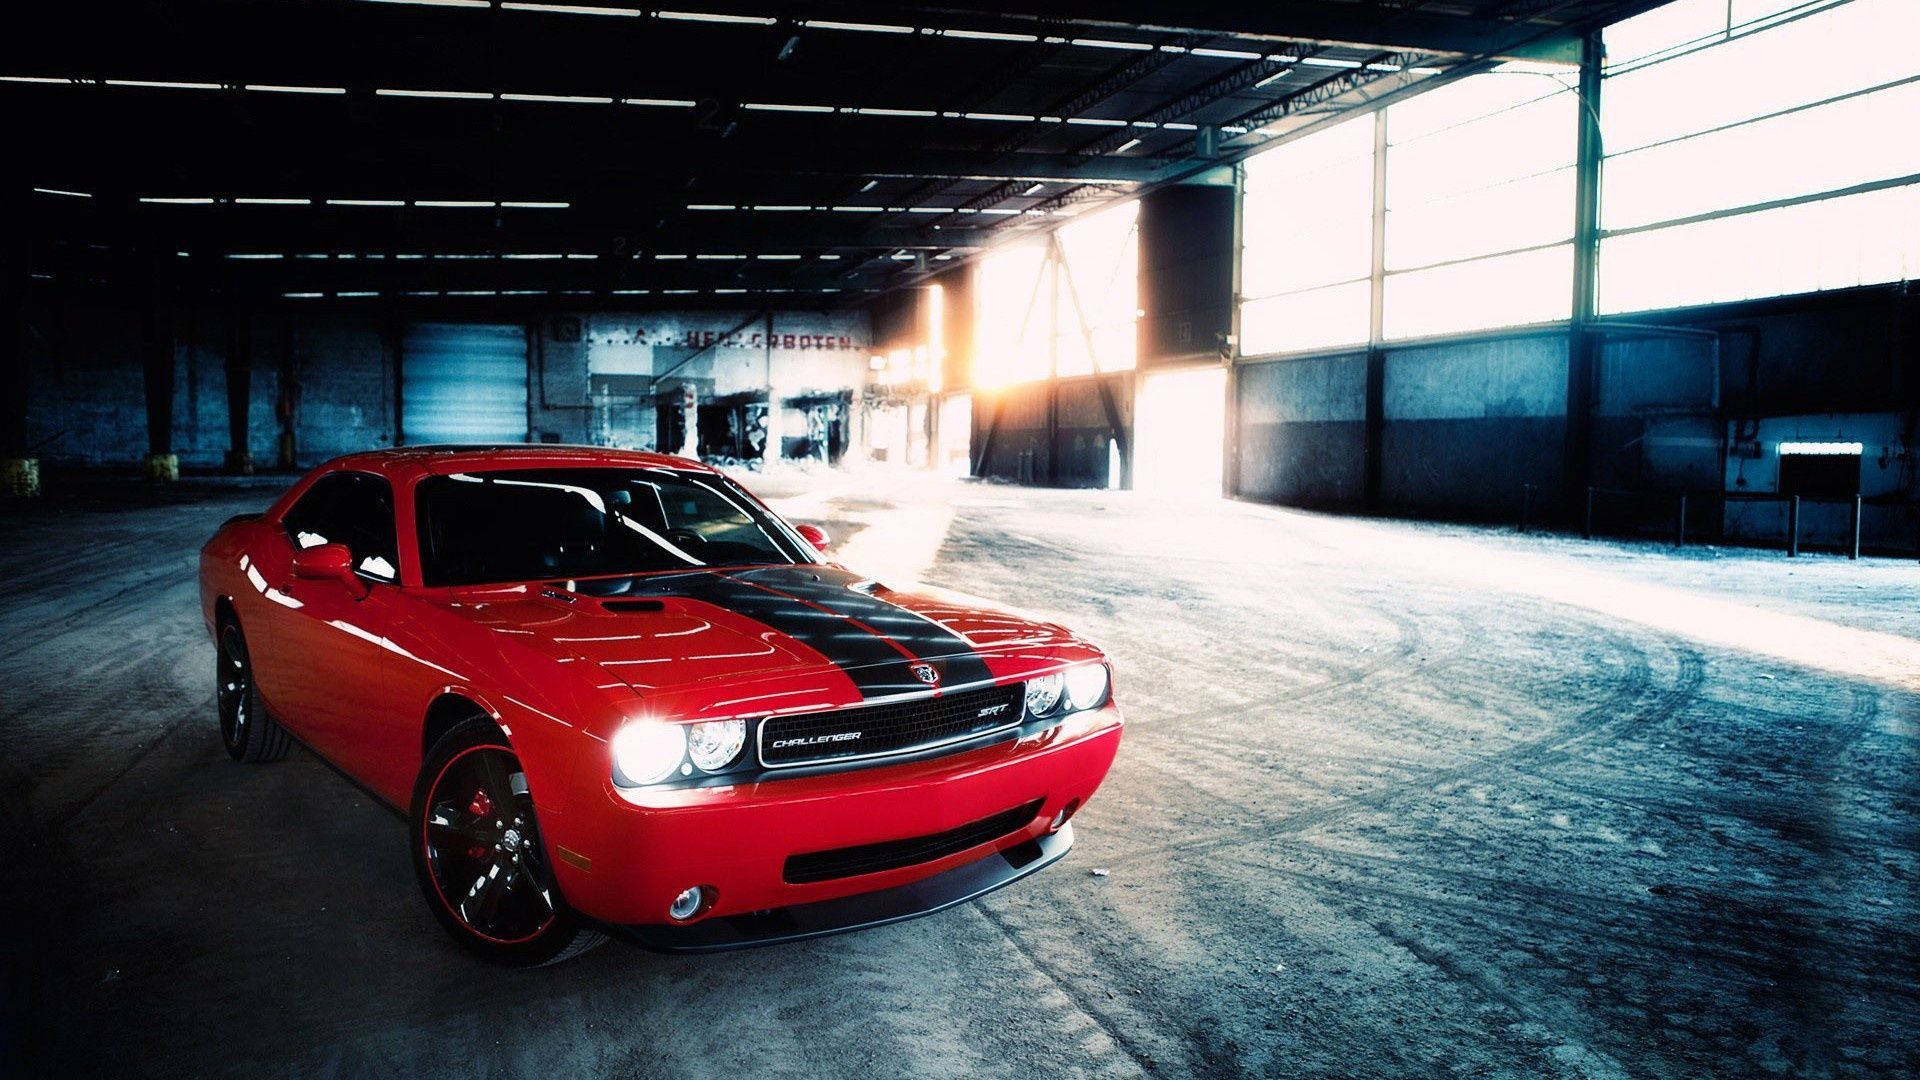 Free Download Pure 100% Dodge HD Wallpaper, Latest Photohoots, Hot Image and more for pc, laptops, ipho. Dodge challenger, Dodge challenger srt, Challenger srt